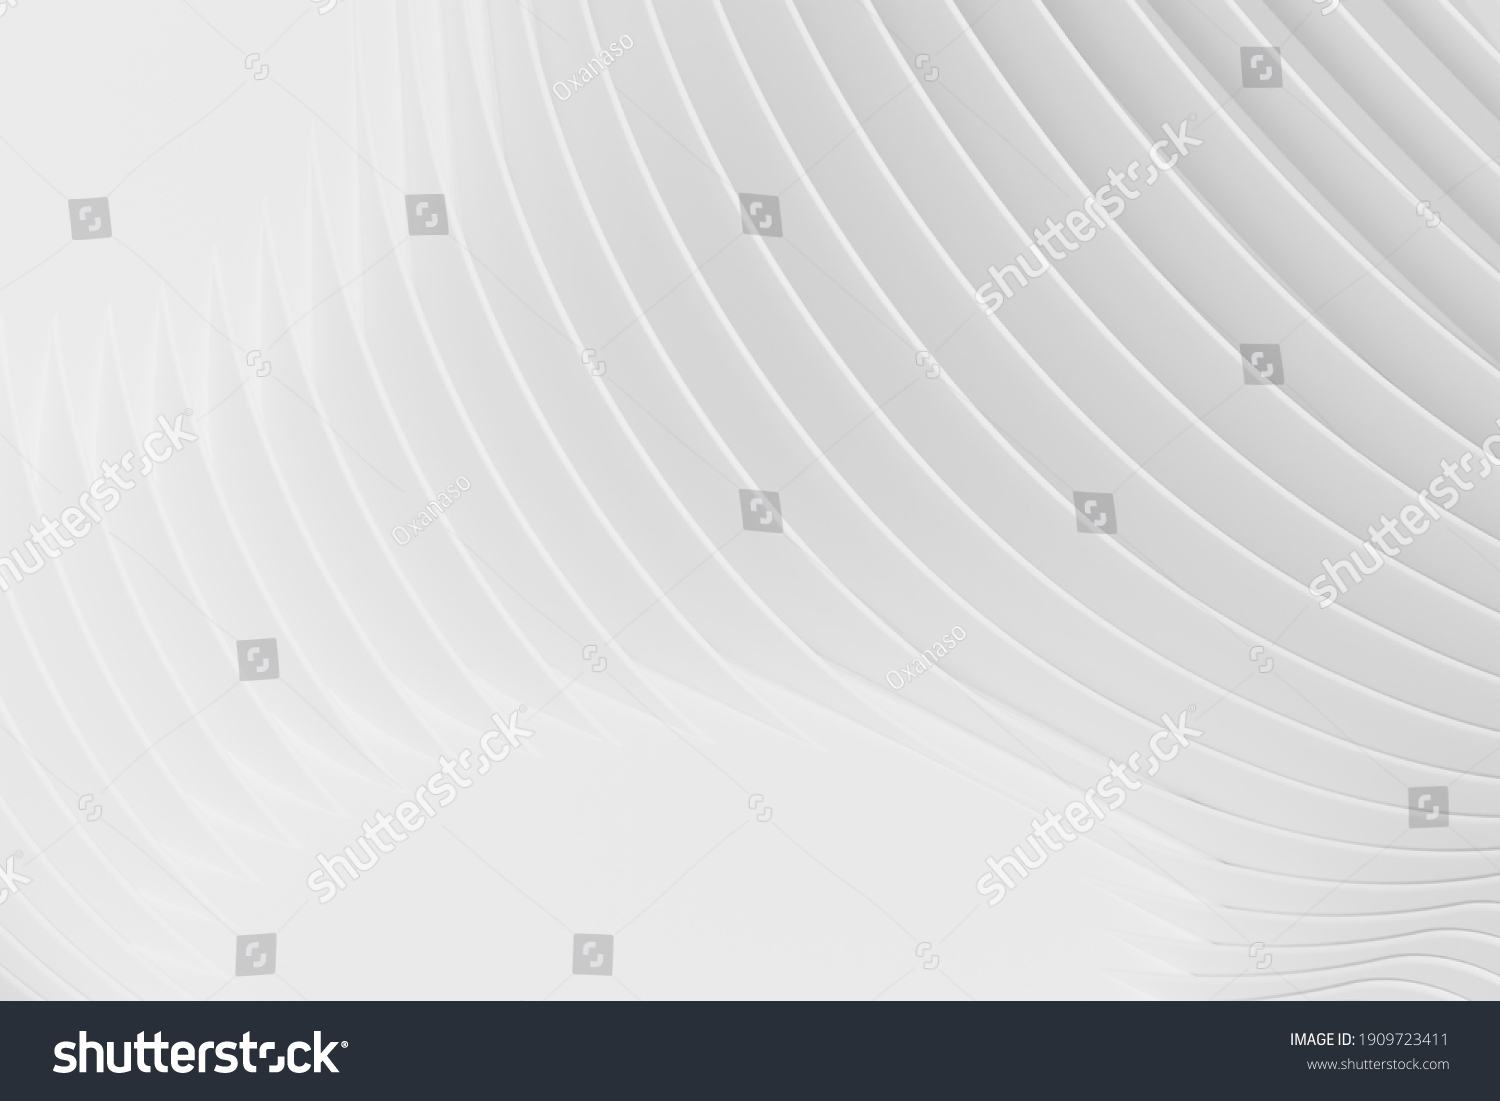 Abstract Futuristic Architecture Circular Concentric Background. Wave Outdoor Structures. Minimal Futuristic Technology Design as Geometric Urban Texture Wallpaper. Close-up 3d Rendering Pattern #1909723411